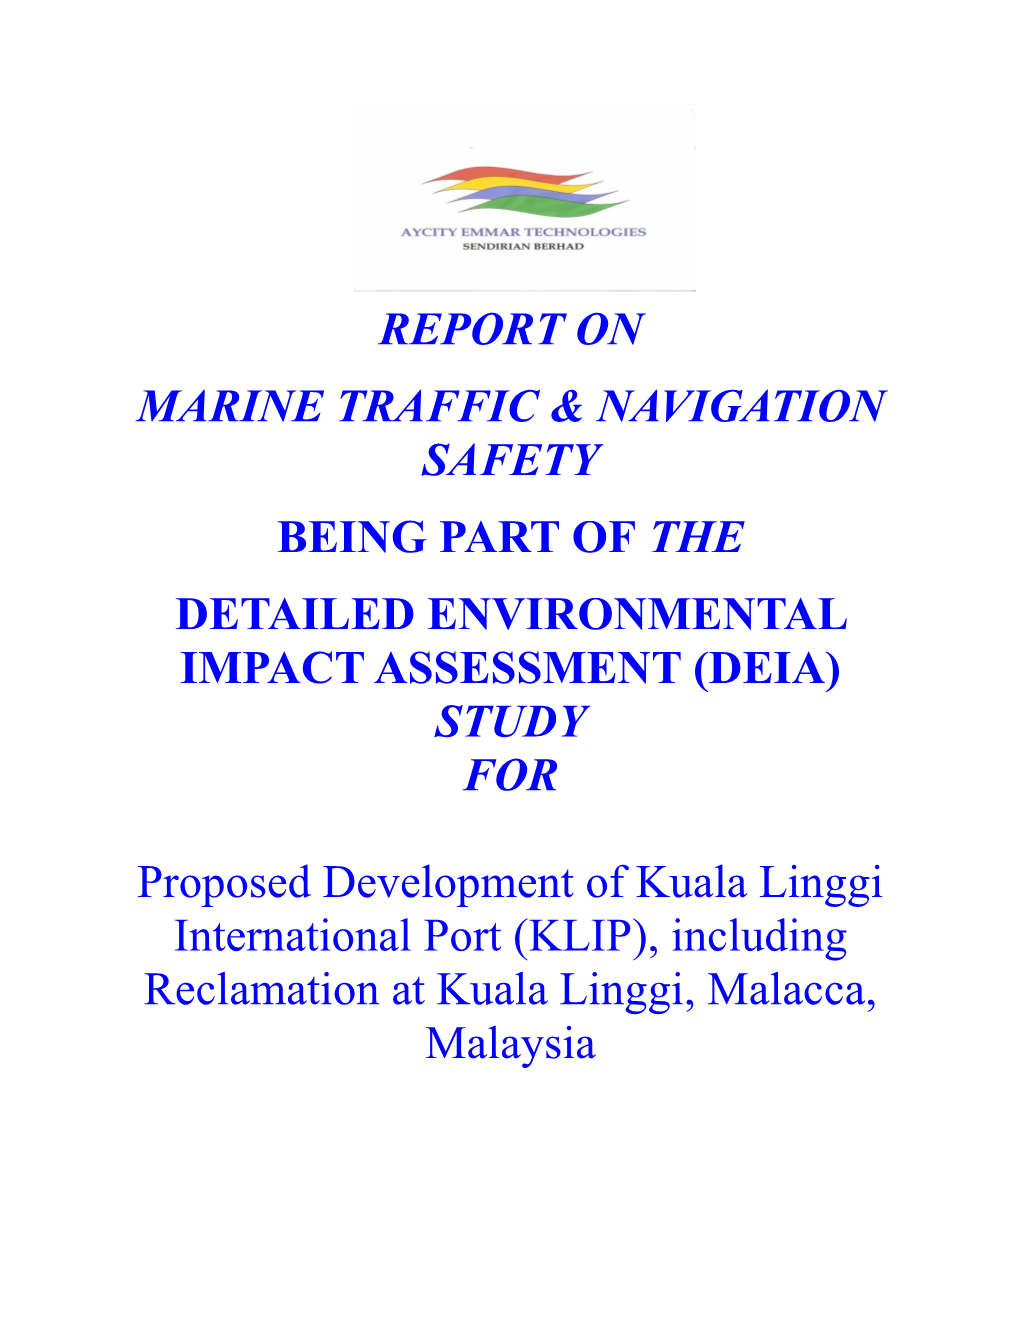 Report on Marine Traffic & Navigation Safety Being